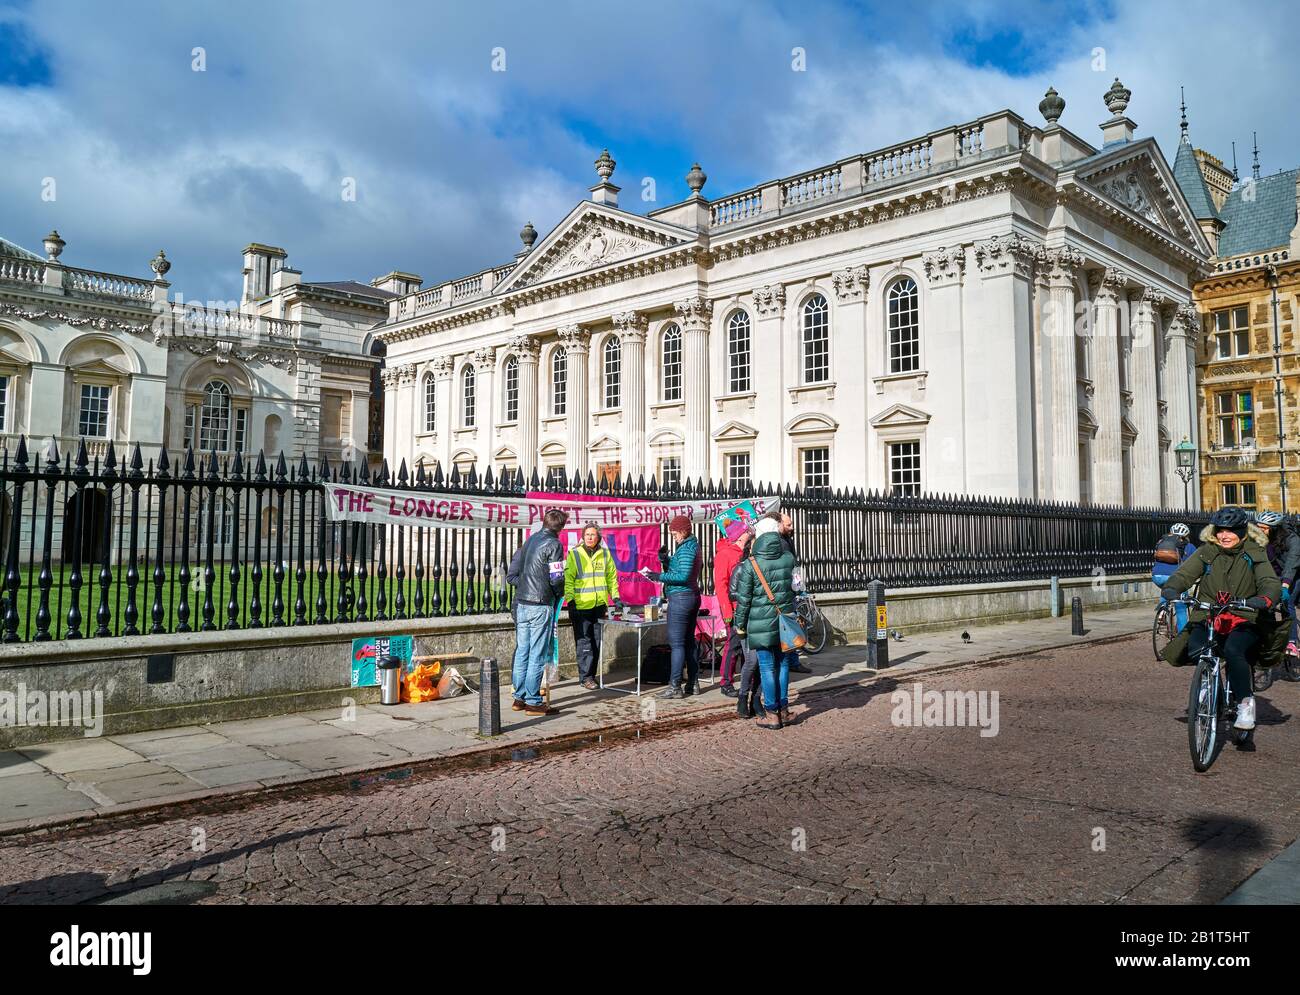 UCU (University and College Union) members protest on 26 february 2020 outside Senate House and St Mary the Great church, university of Cambridge, England, about changes to their USS (Universities Superannuation Scheme) pension entitlement. Stock Photo